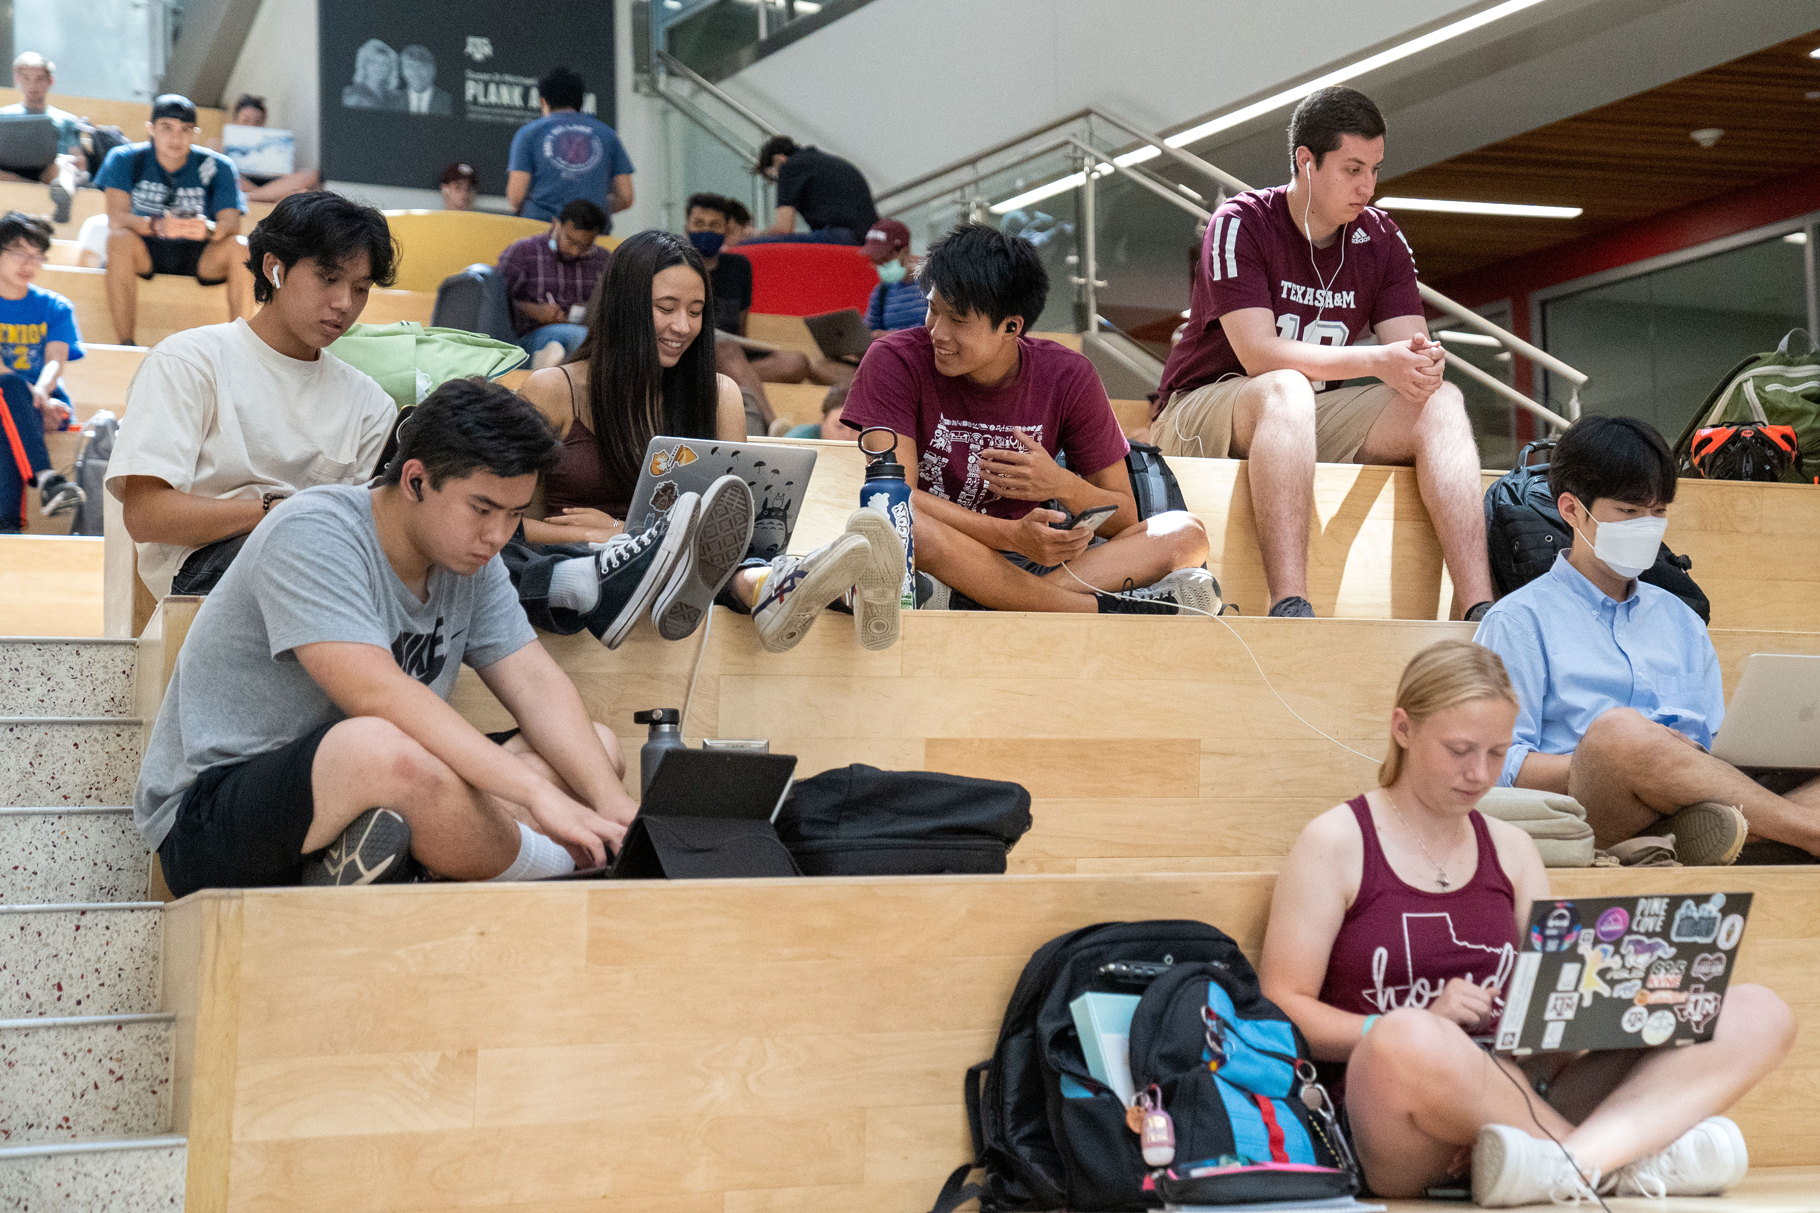 Students working on their computers at the Texas A&amp;M University campus